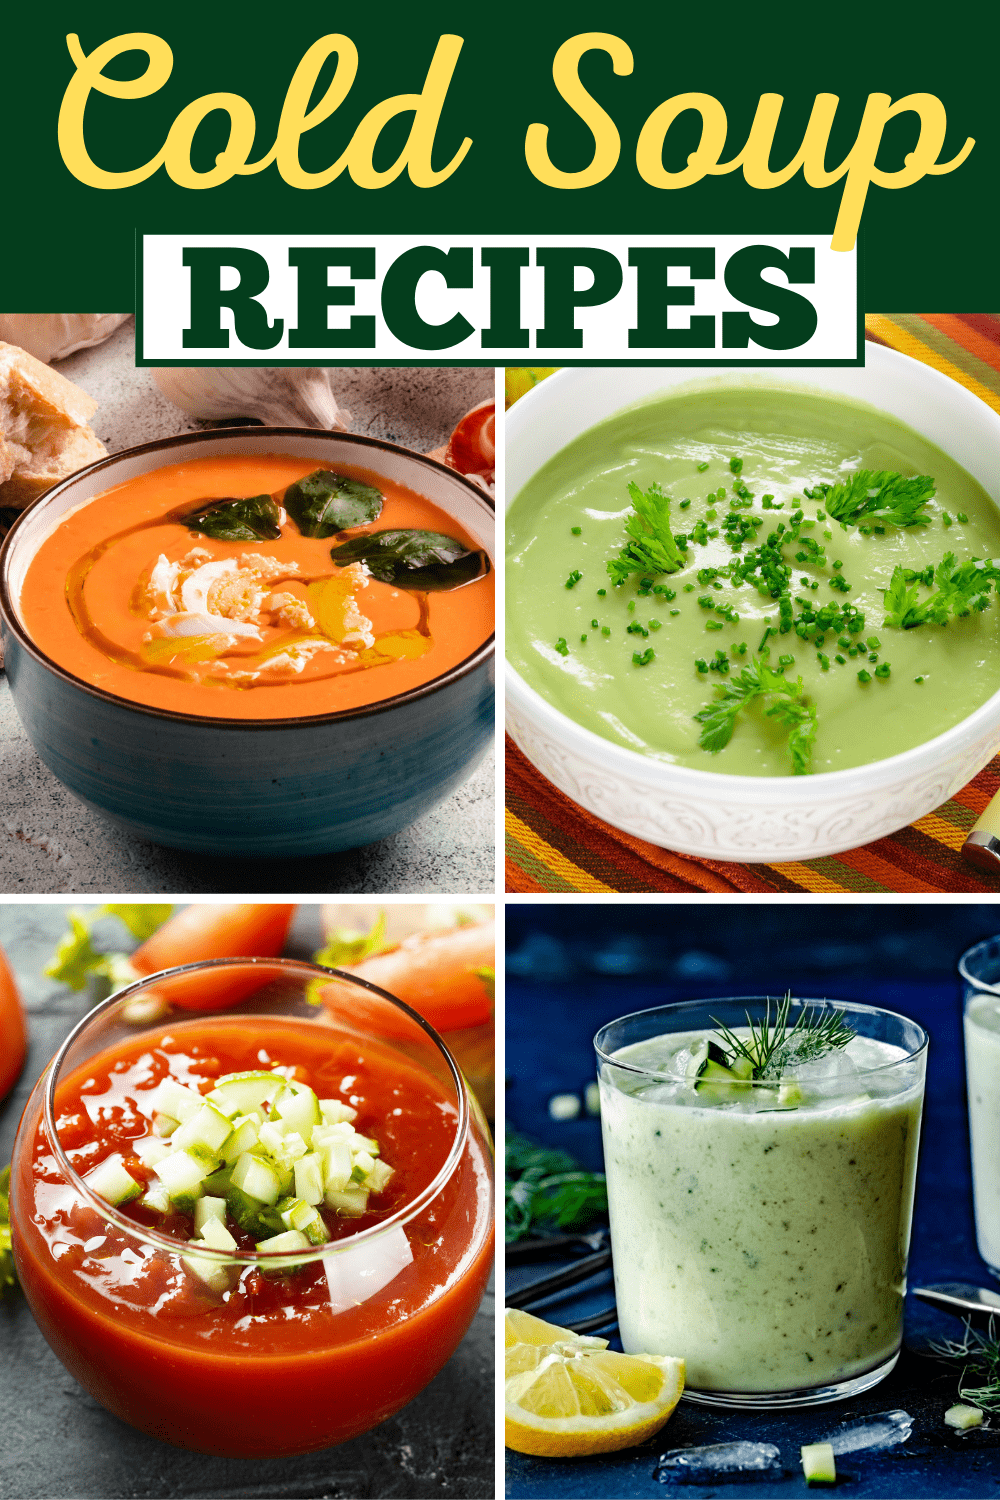 25 Best Cold Soup Recipes - Insanely Good